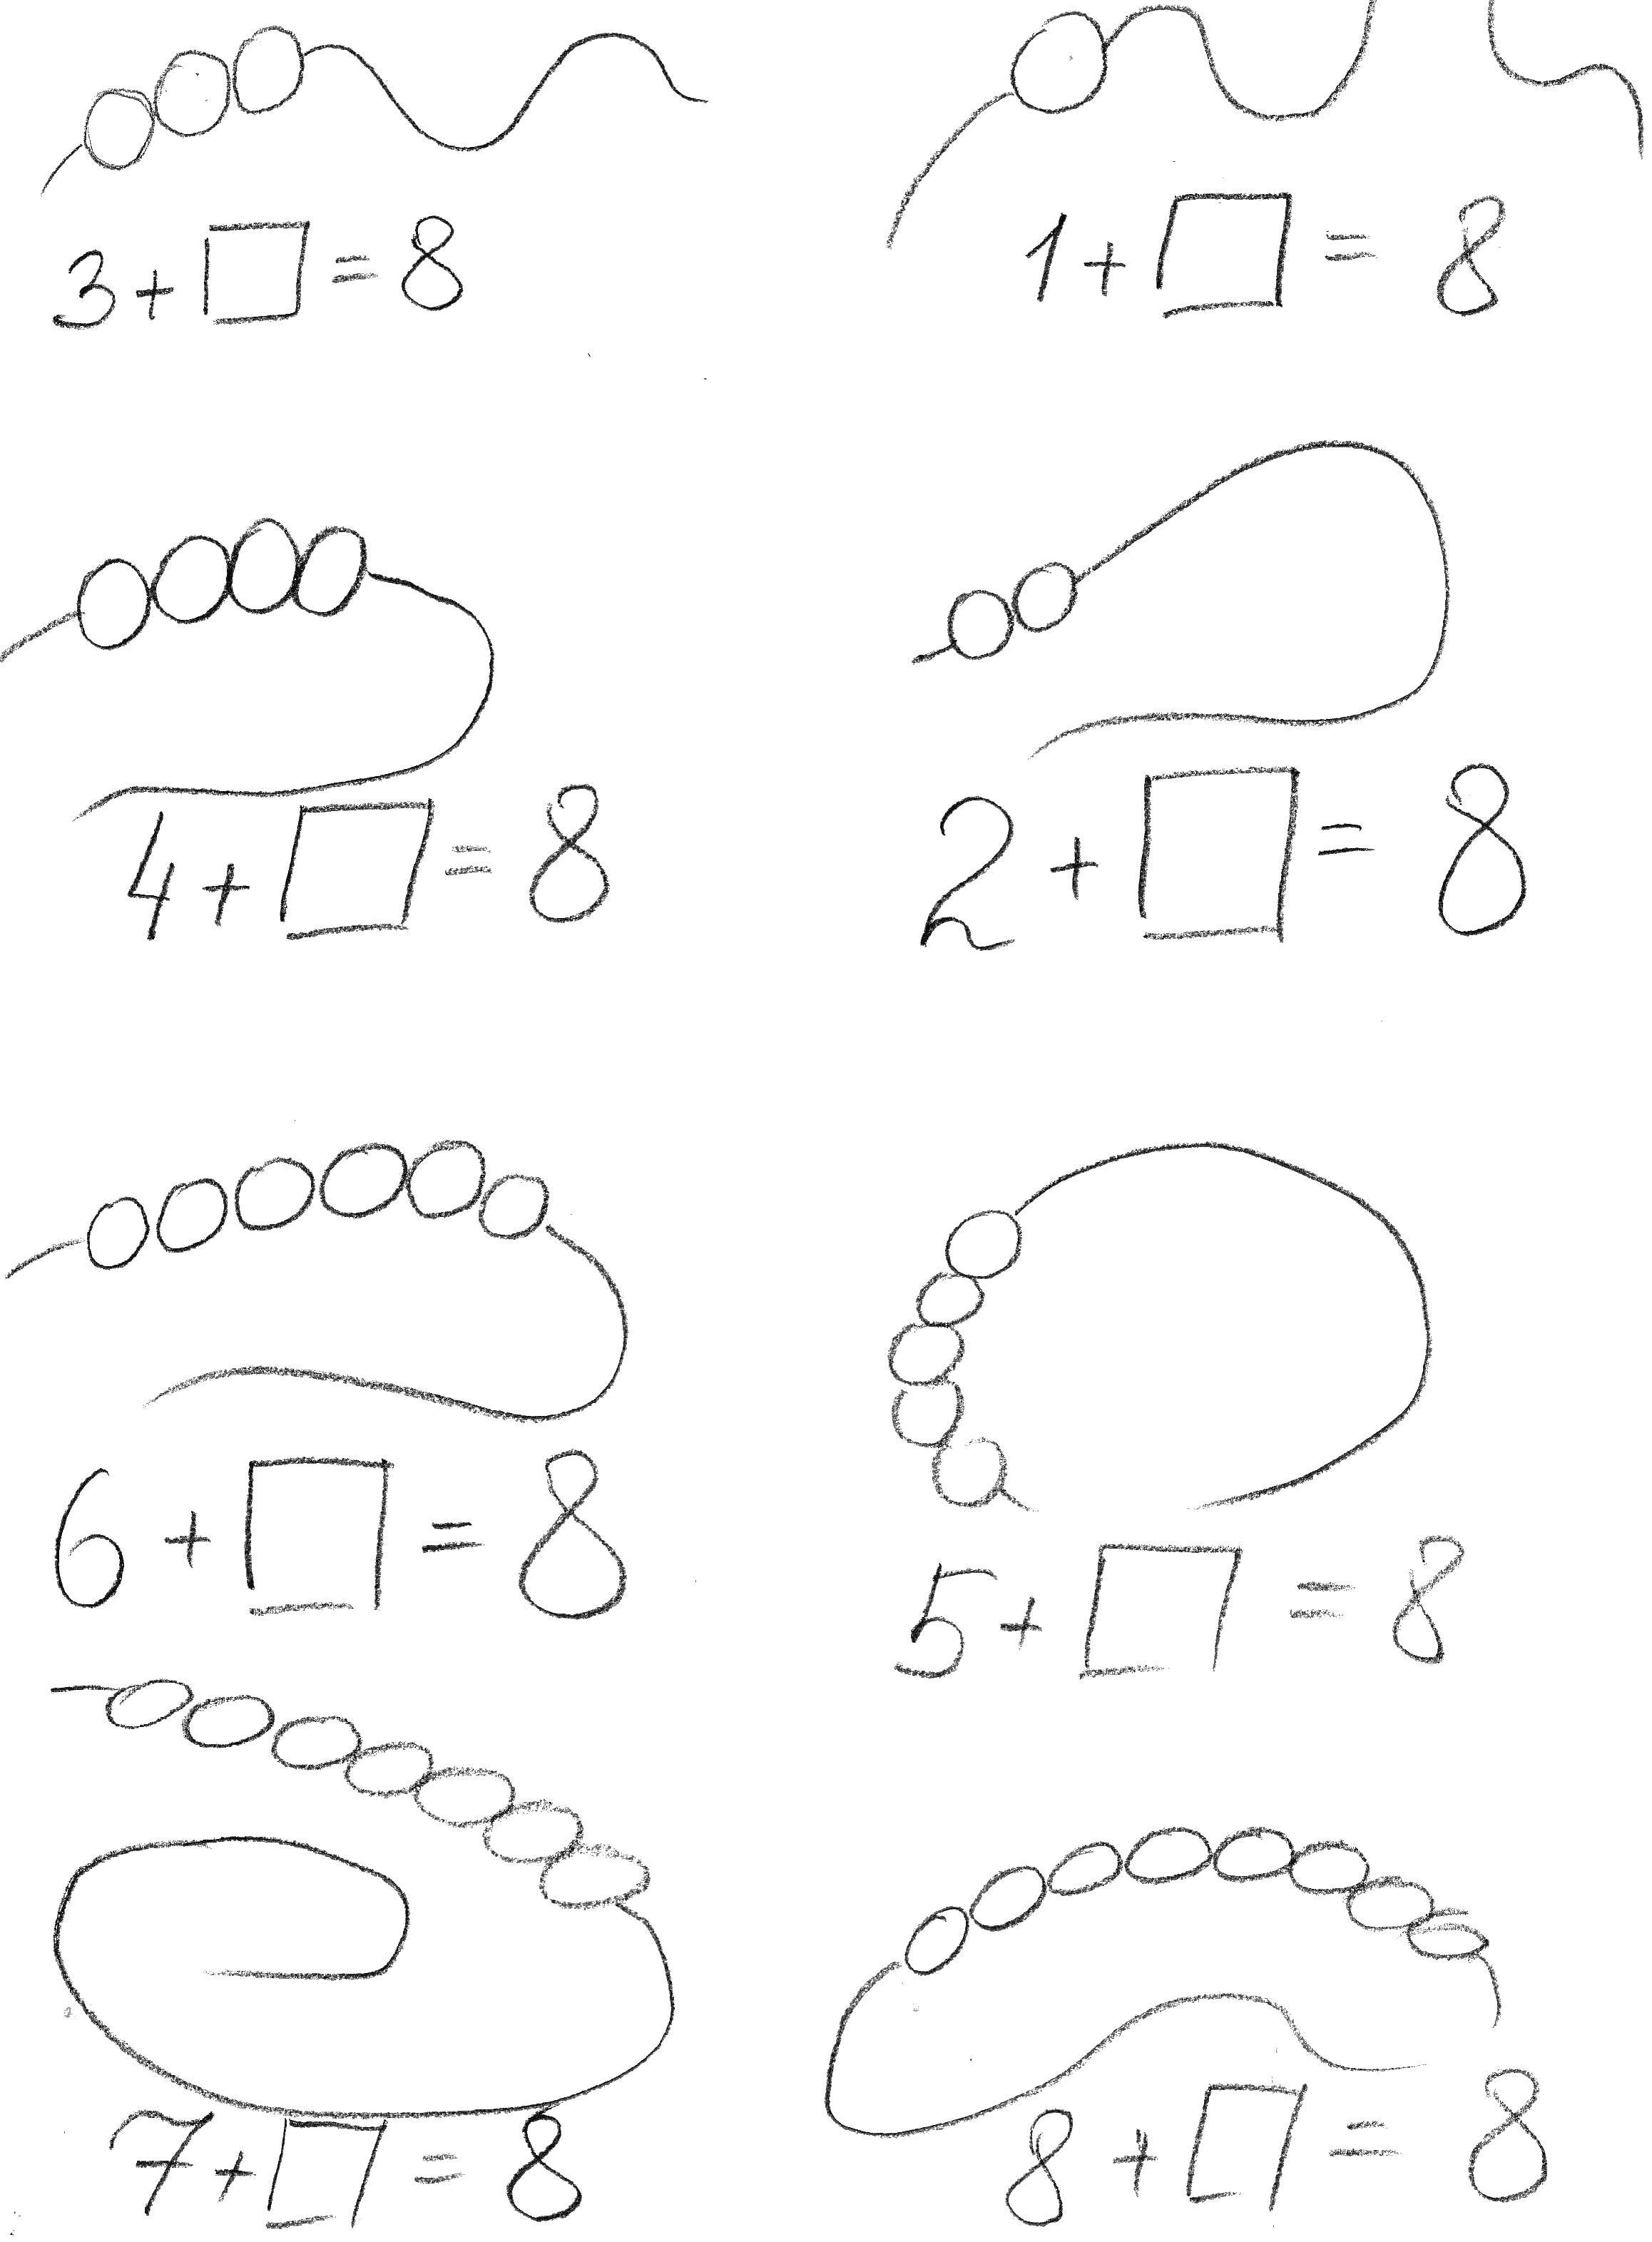 Coloring Math riddles. Category mathematical coloring pages. Tags:  mathematics, mystery.